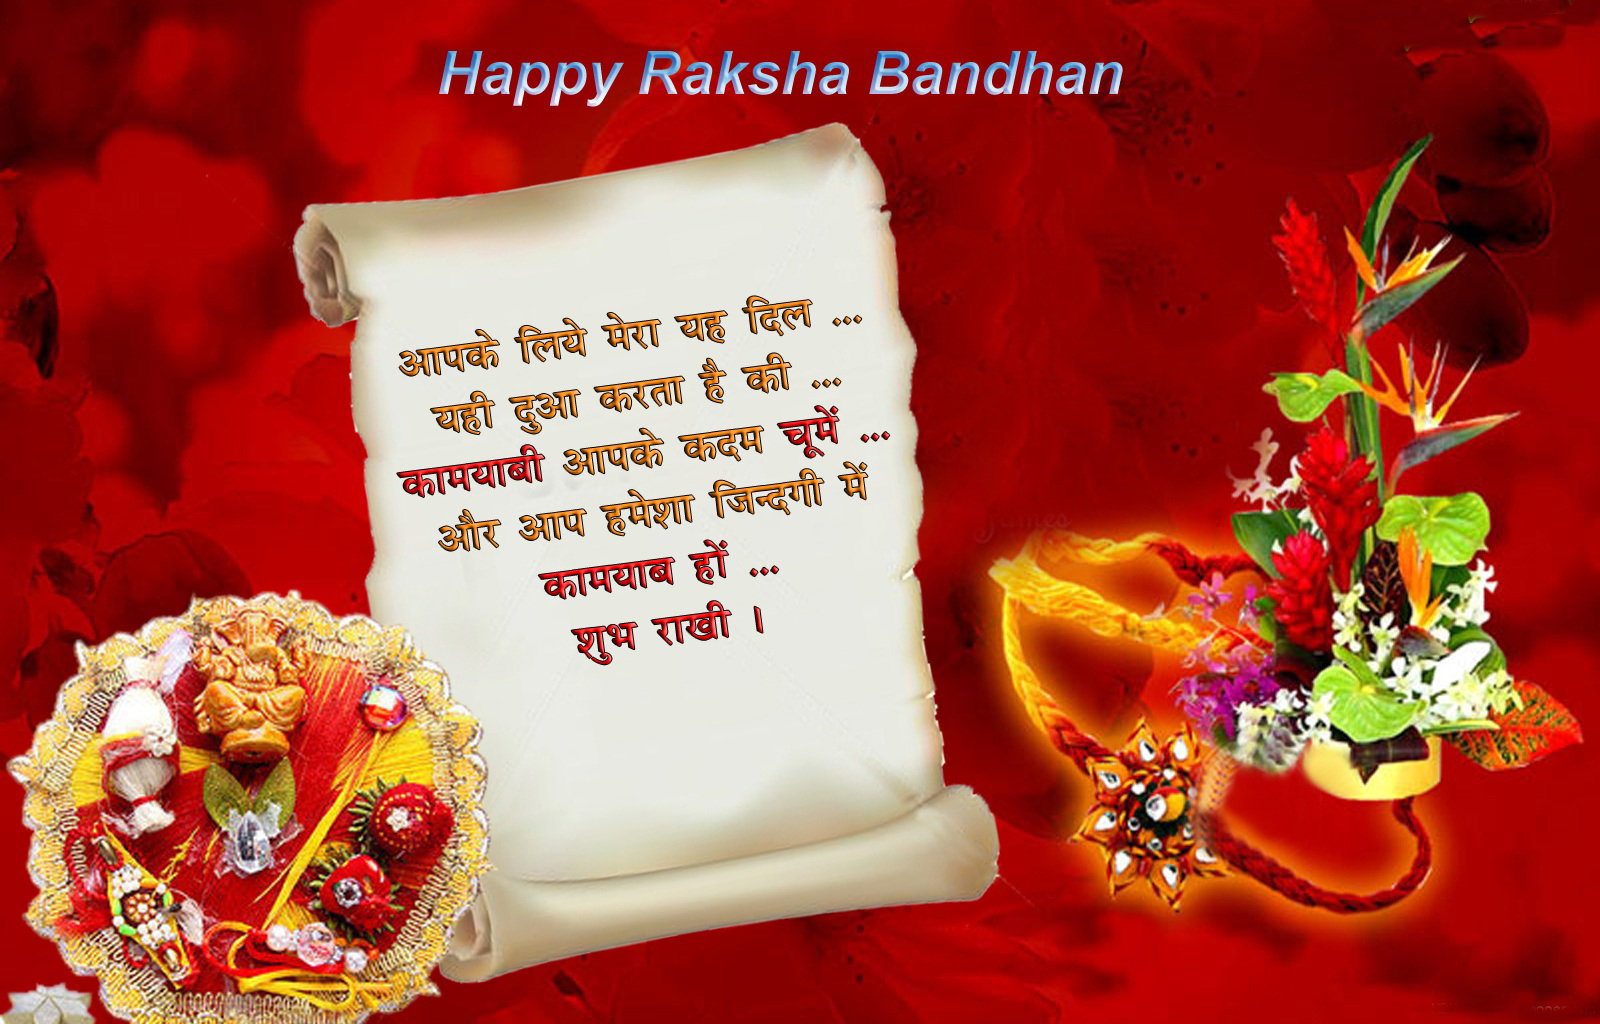 Happy Raksha Bandhan 2021 – Wishes, Messages, and Quotes